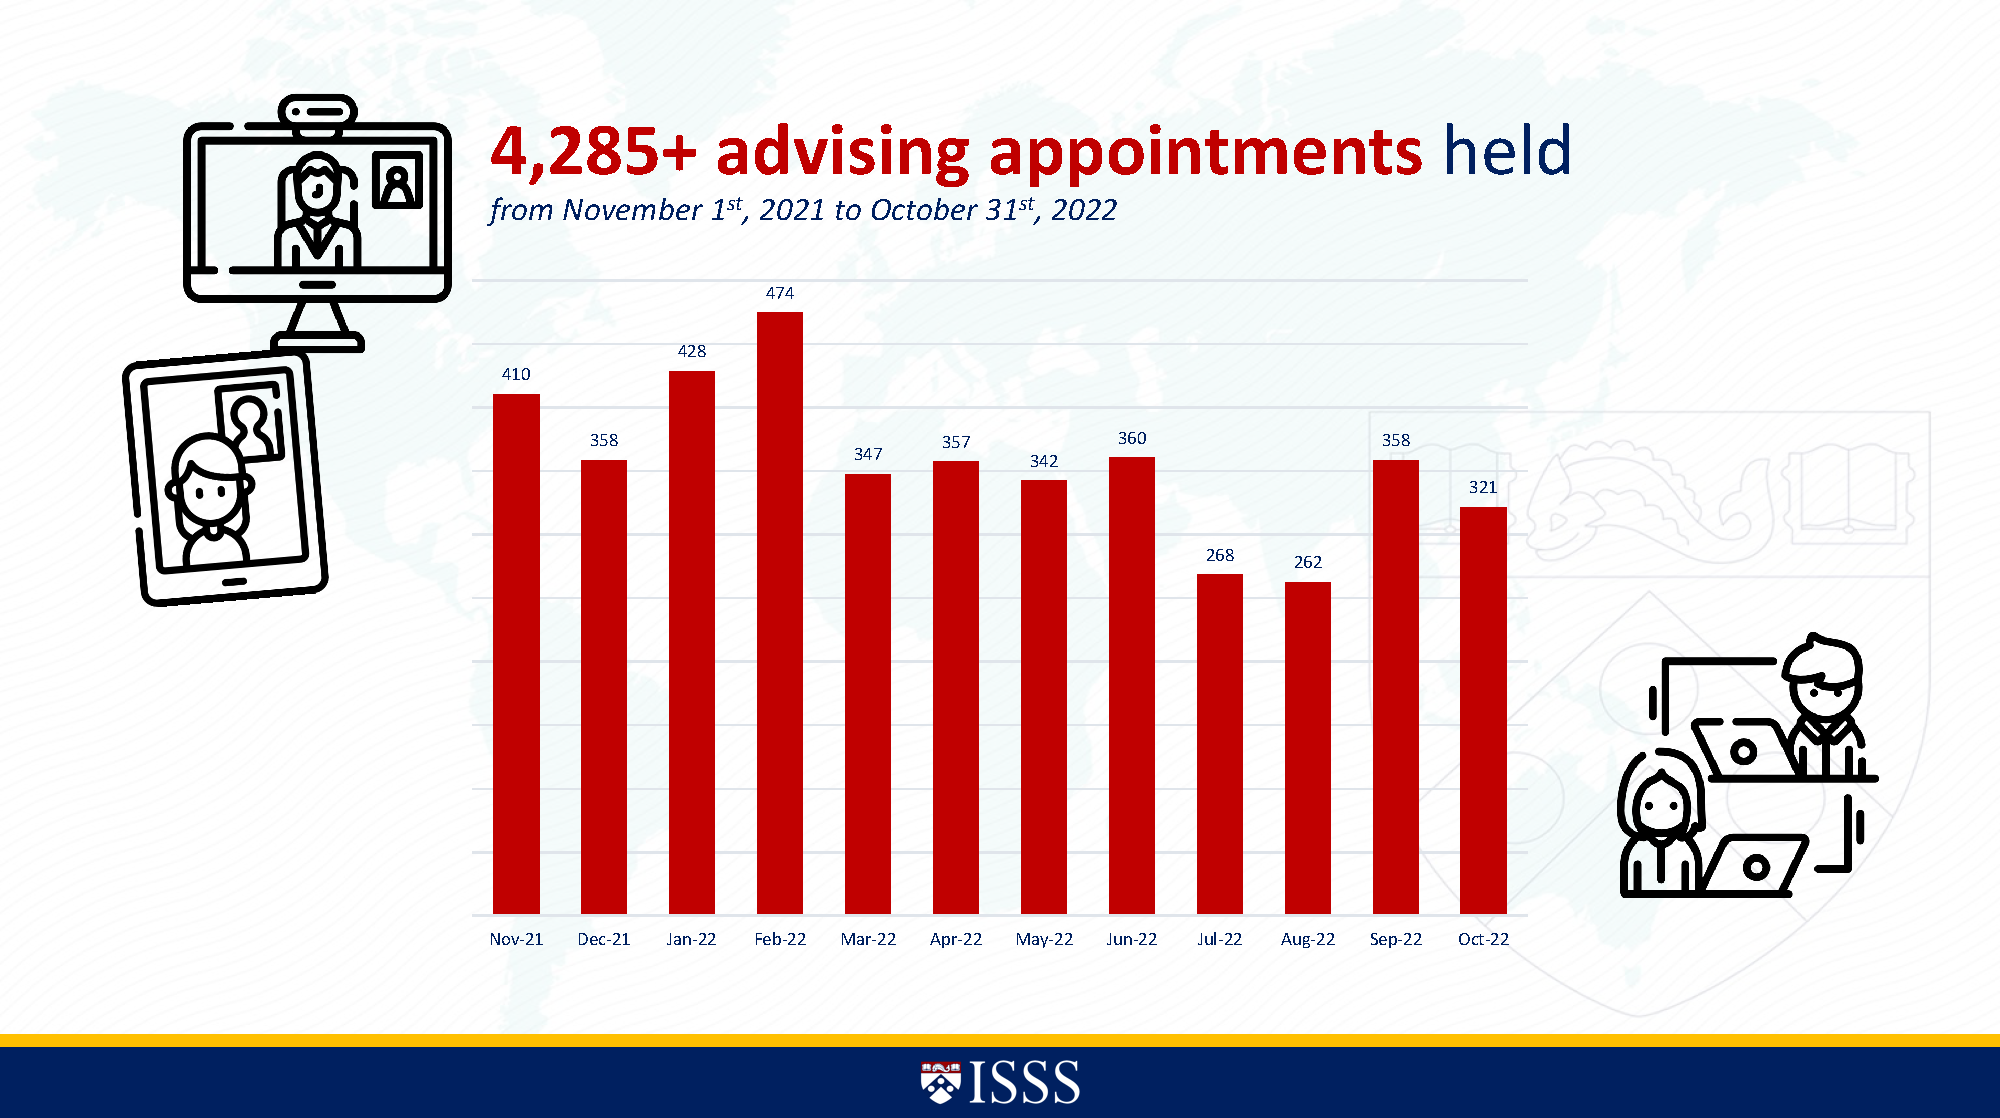 Graph of the monthly break down of the 4285 advising appointments held